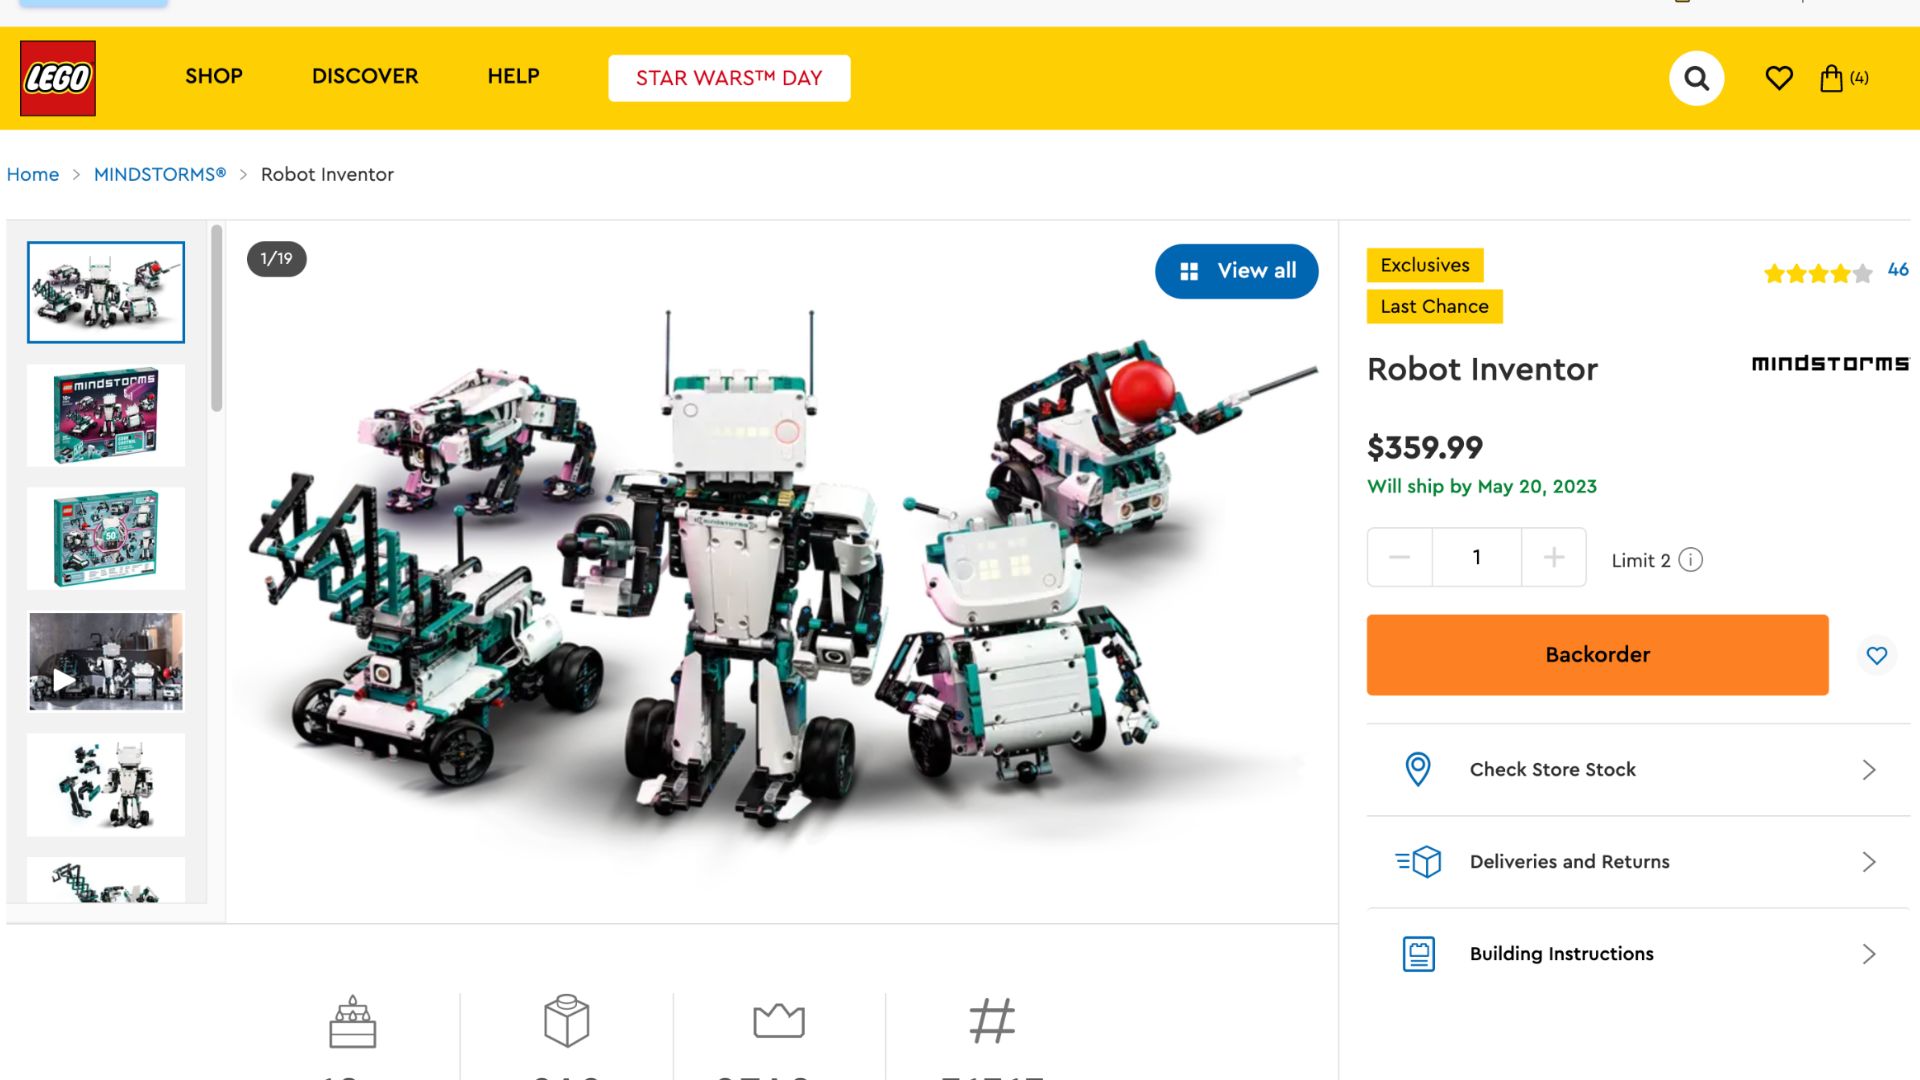 Last chance to backorder the Robot Inventor